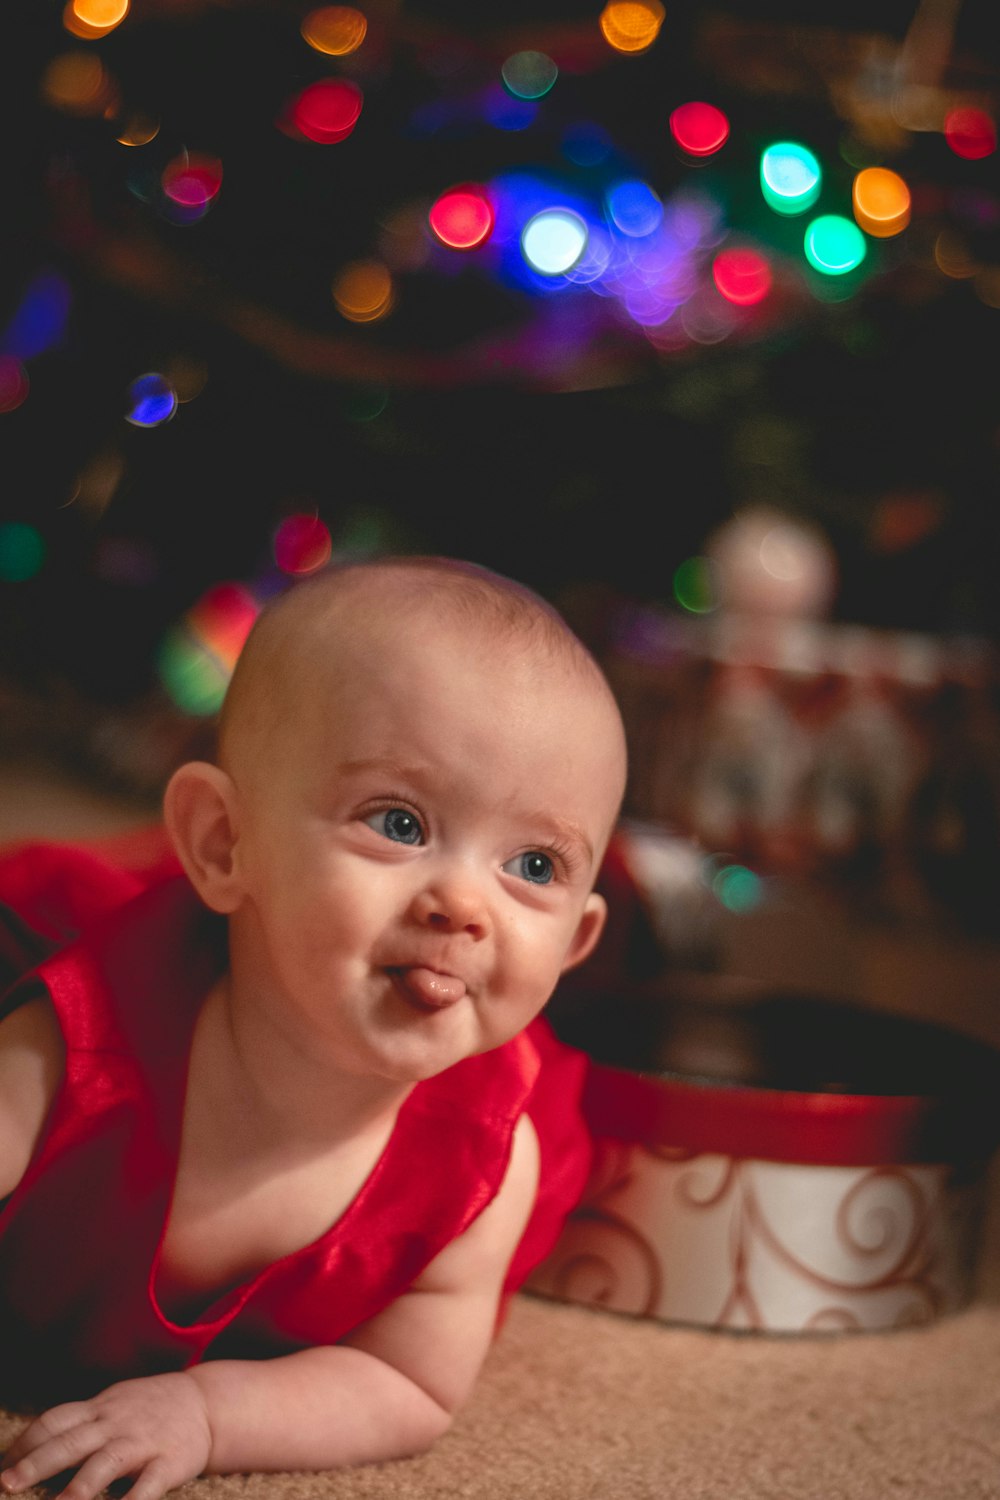 1000+ Funny Baby Pictures | Download Free Images on Unsplash